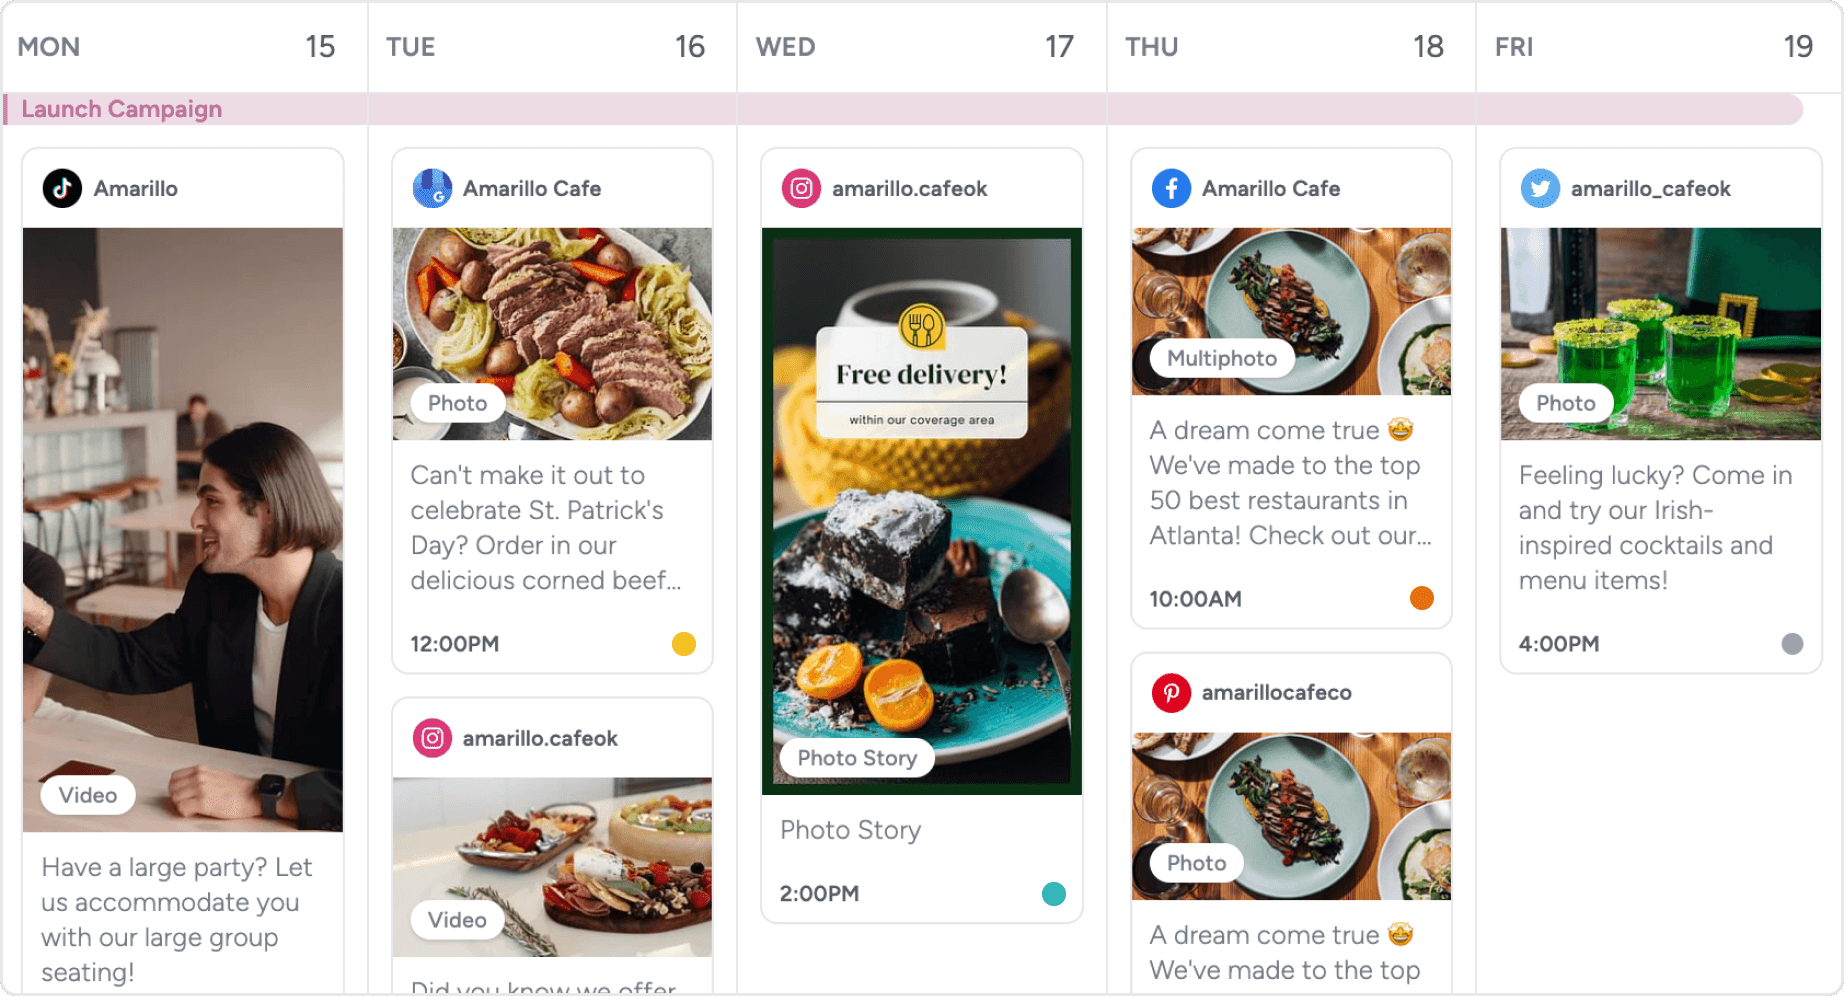 A content calendar in Gain shows many social posts scheduled on different days